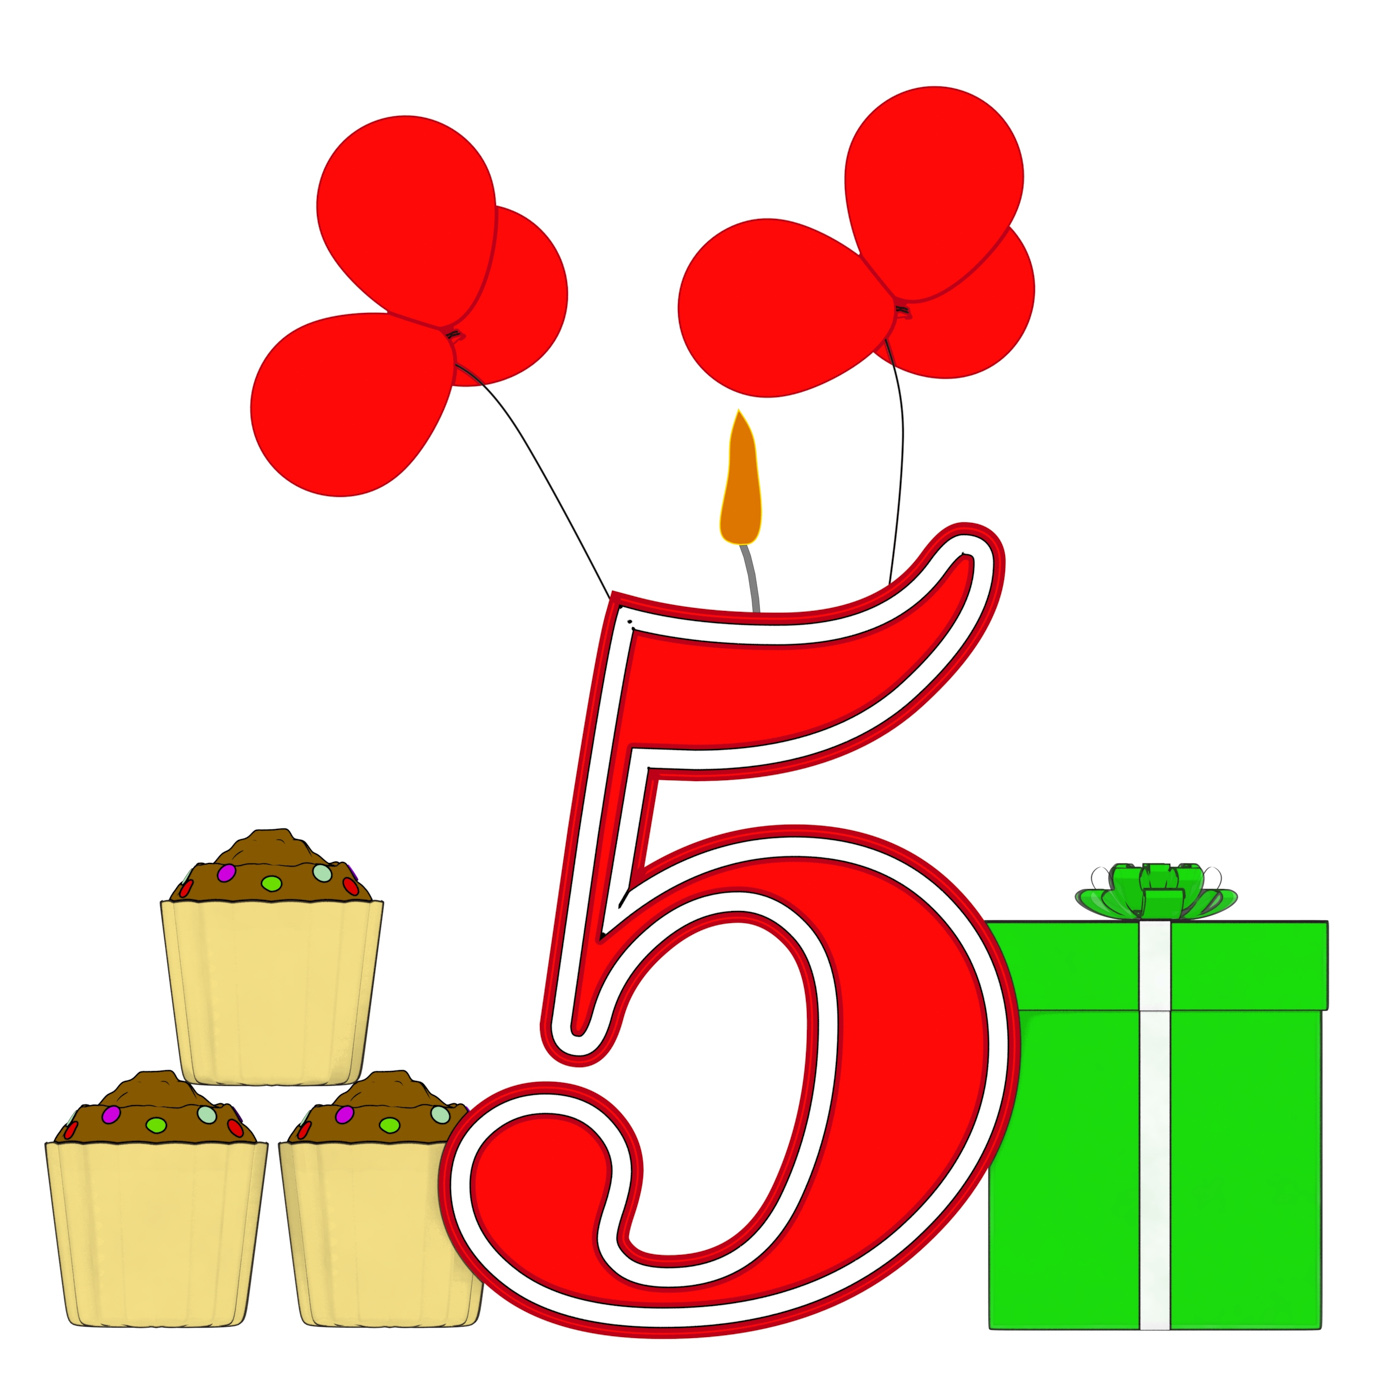 Number five candle shows fourth birthday or birth anniversary photo